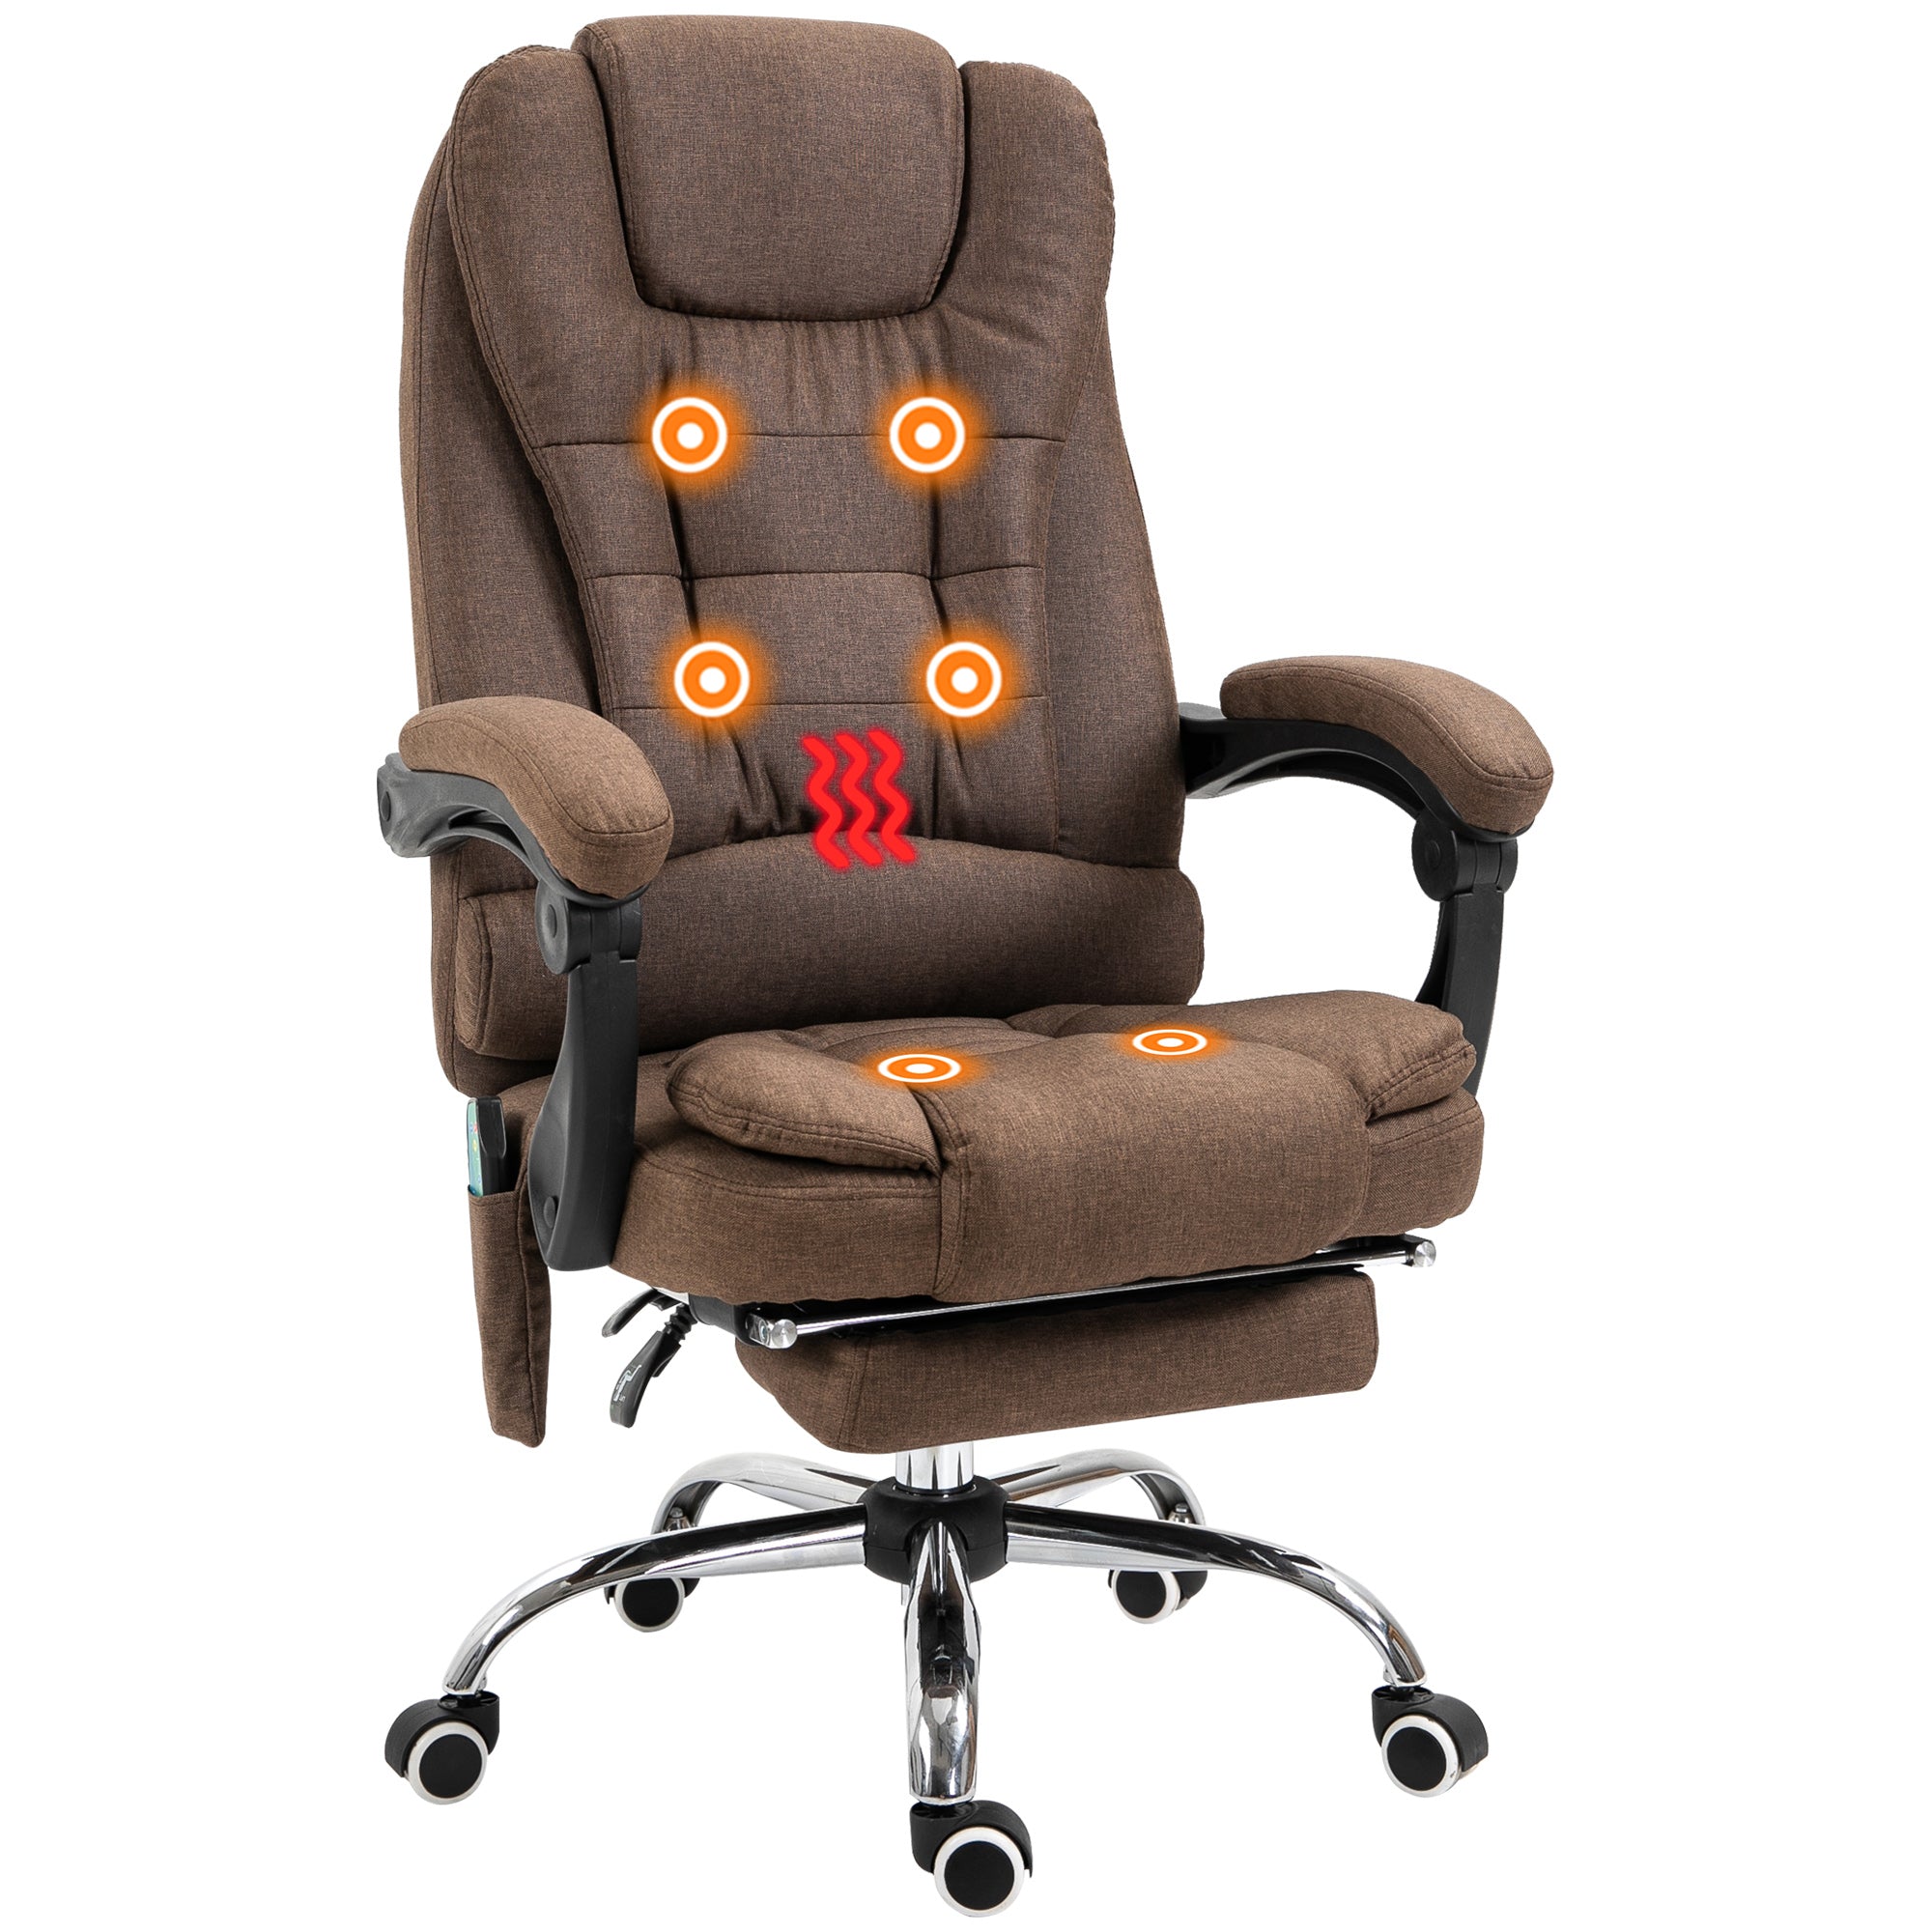 Vinsetto Ergonomic Heated 6 Points Vibration Massage Office Chair Brown  | TJ Hughes